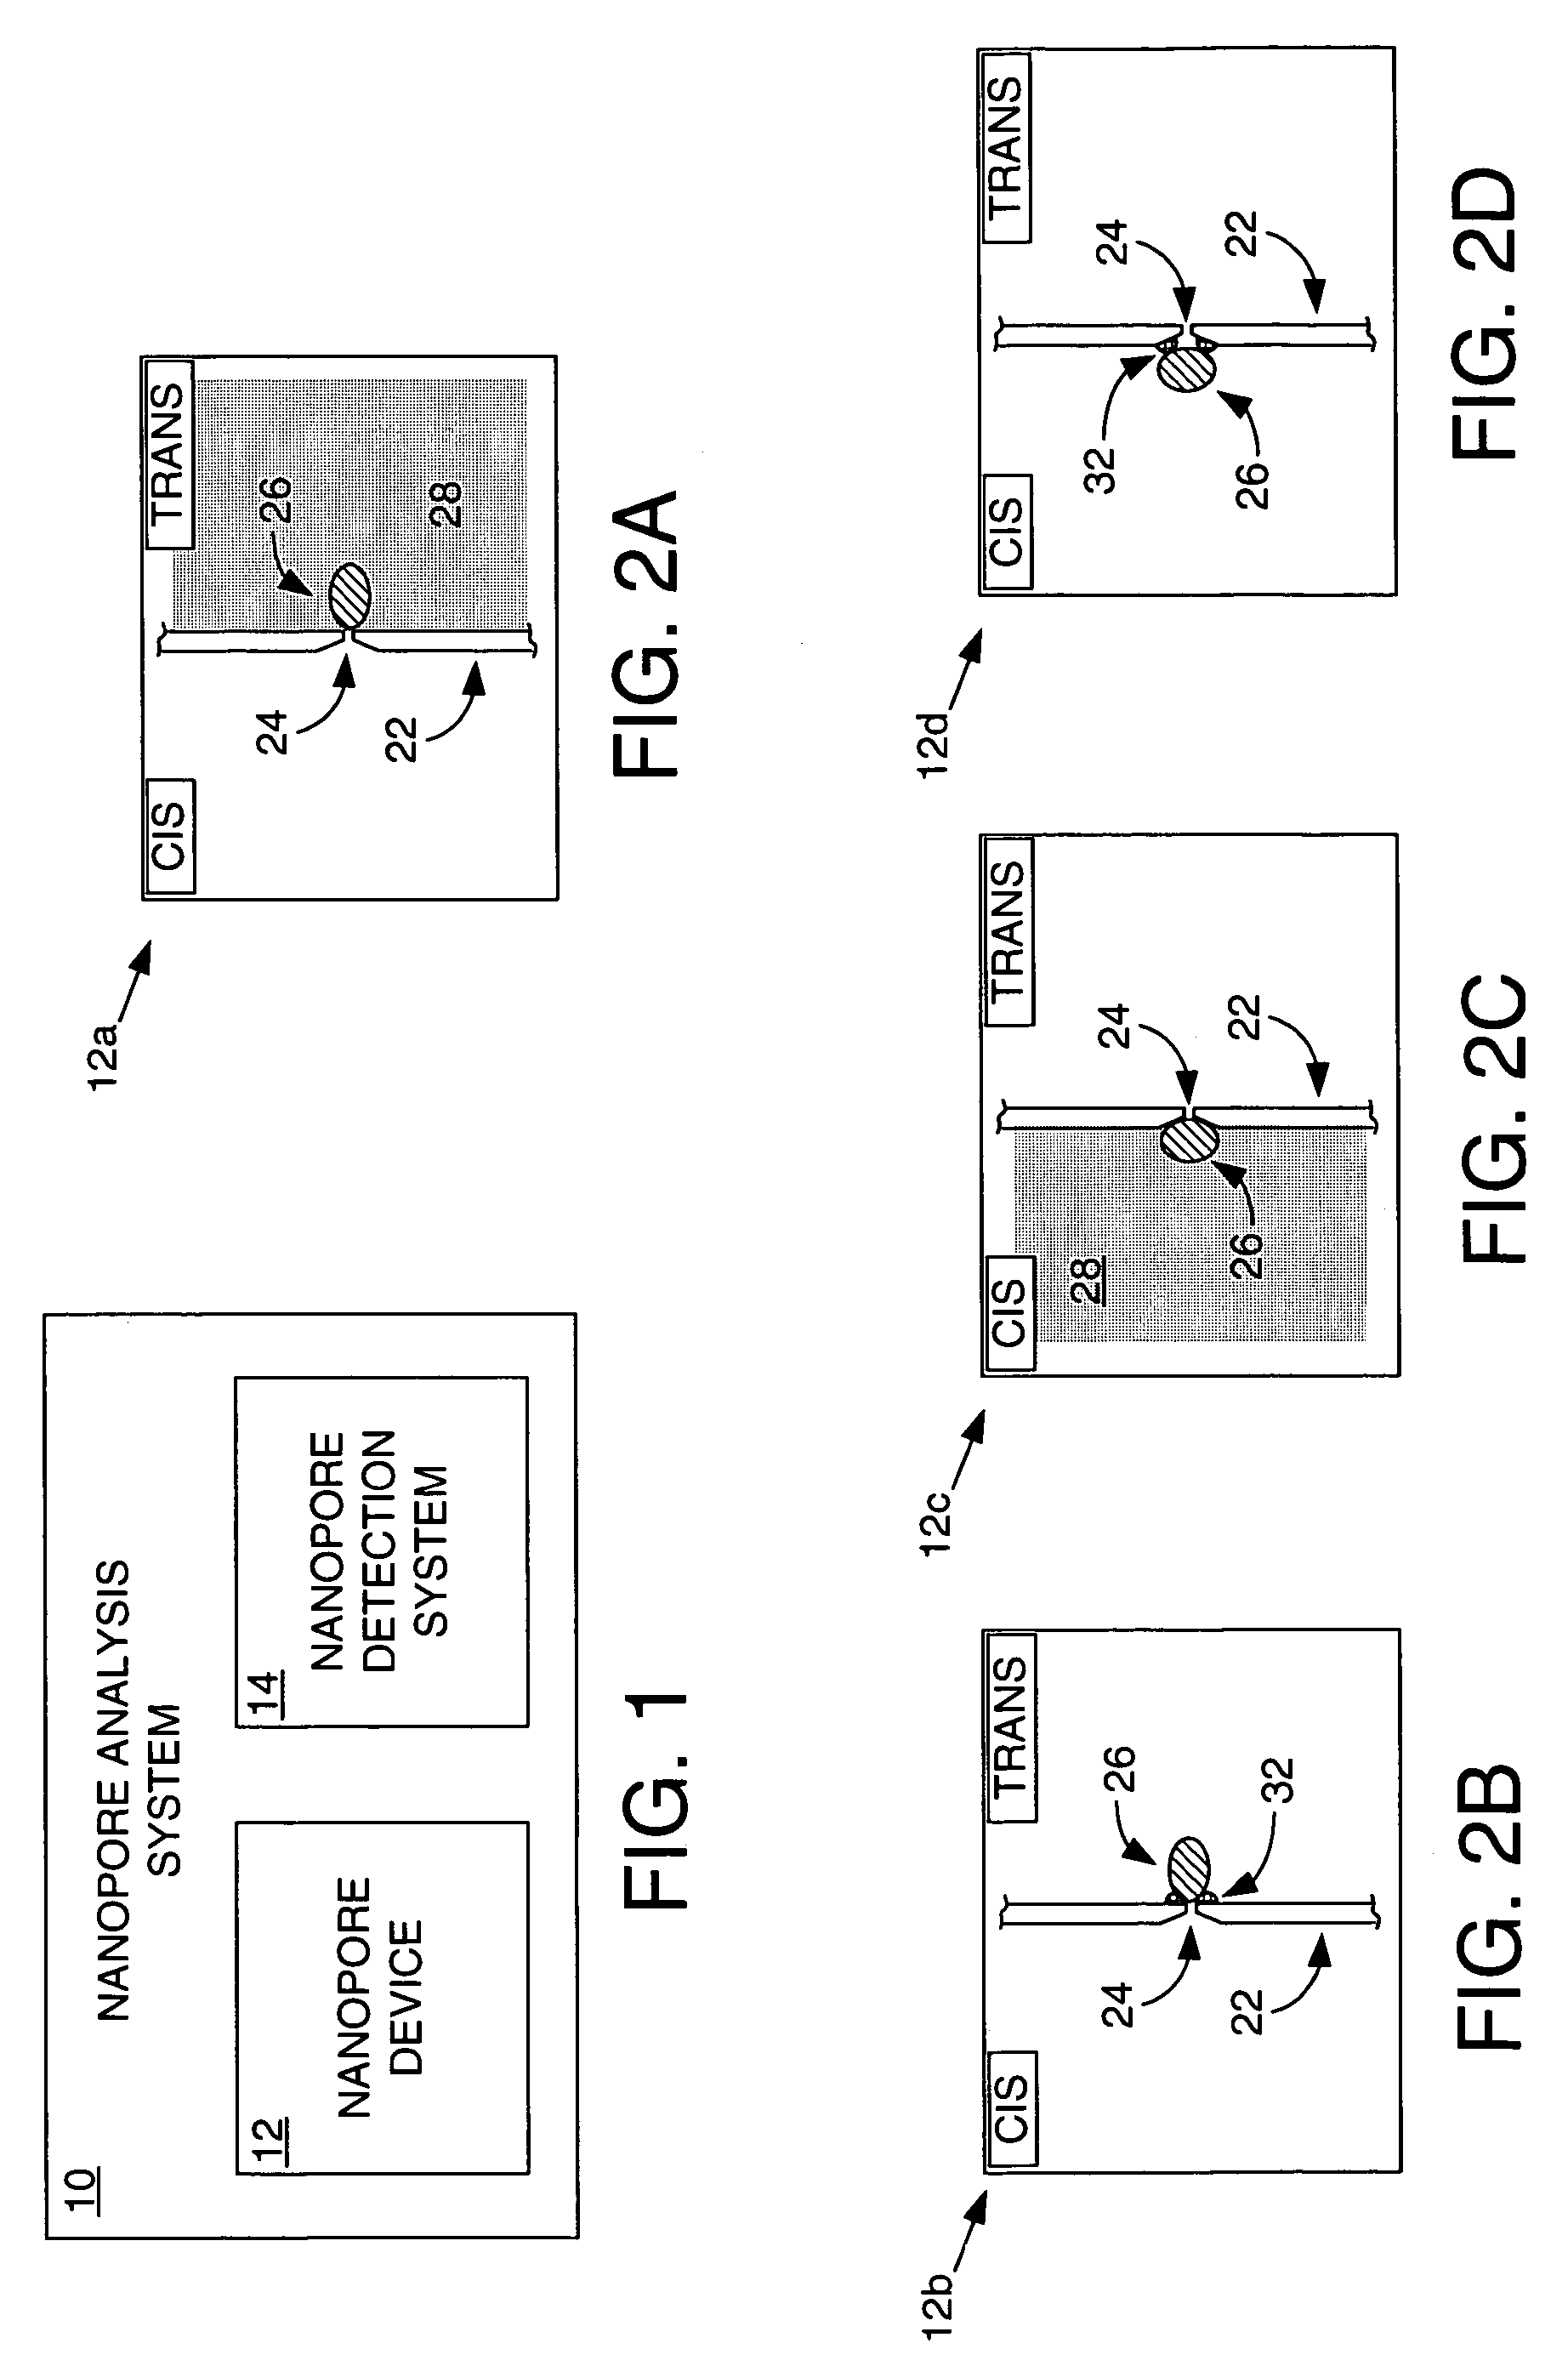 Methods and apparatus for characterizing polynucleotides